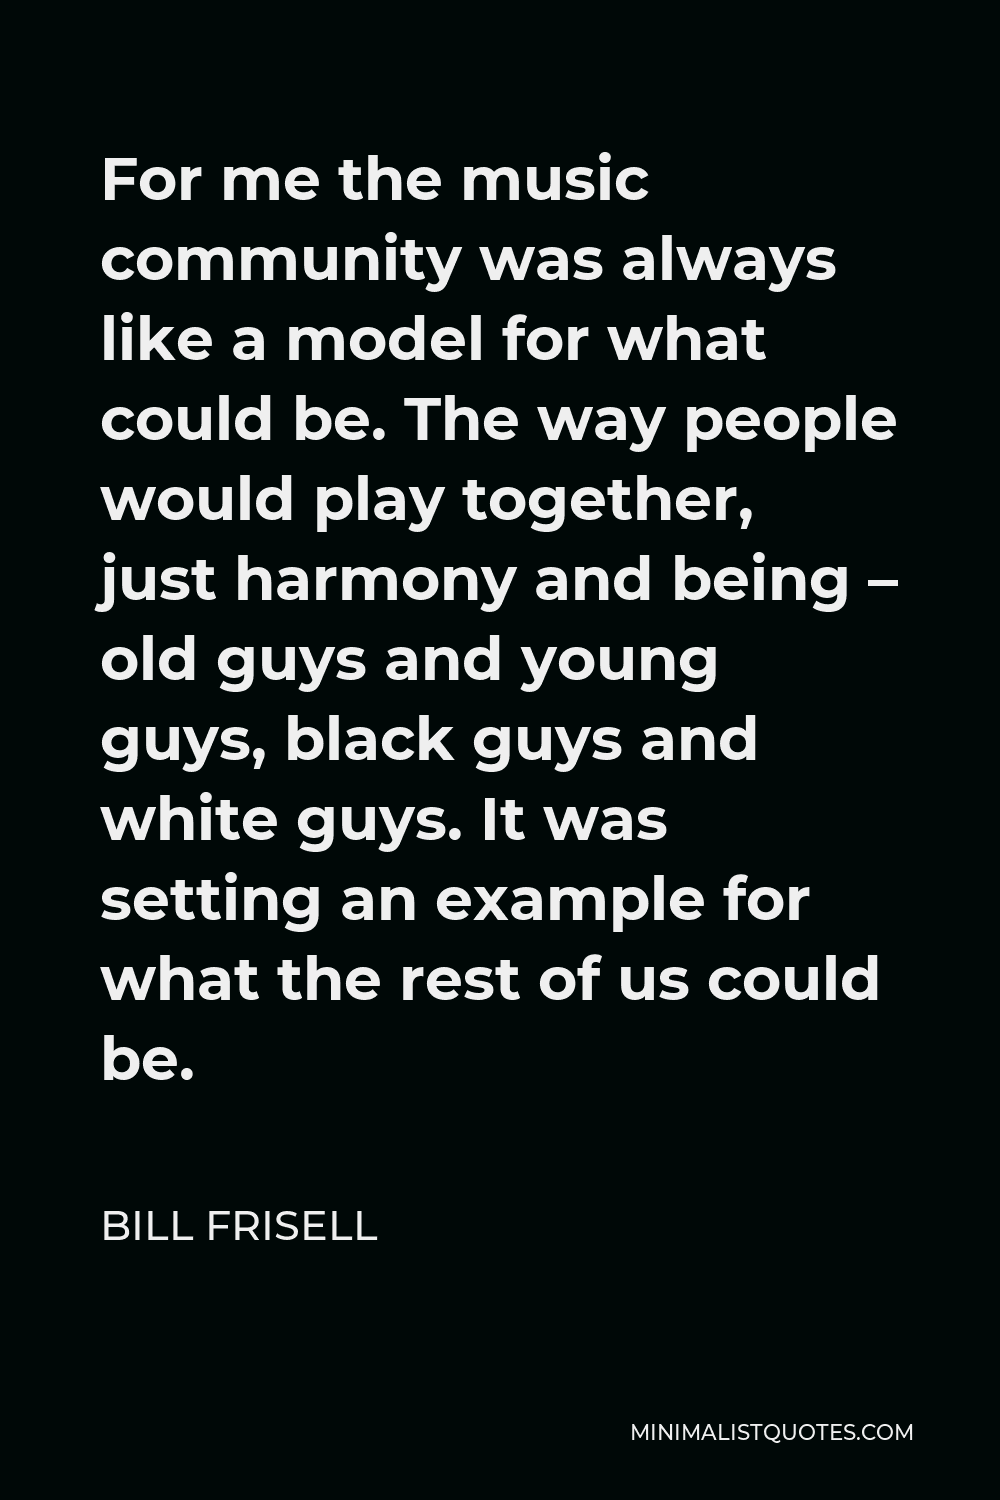 Bill Frisell Quote - For me the music community was always like a model for what could be. The way people would play together, just harmony and being – old guys and young guys, black guys and white guys. It was setting an example for what the rest of us could be.